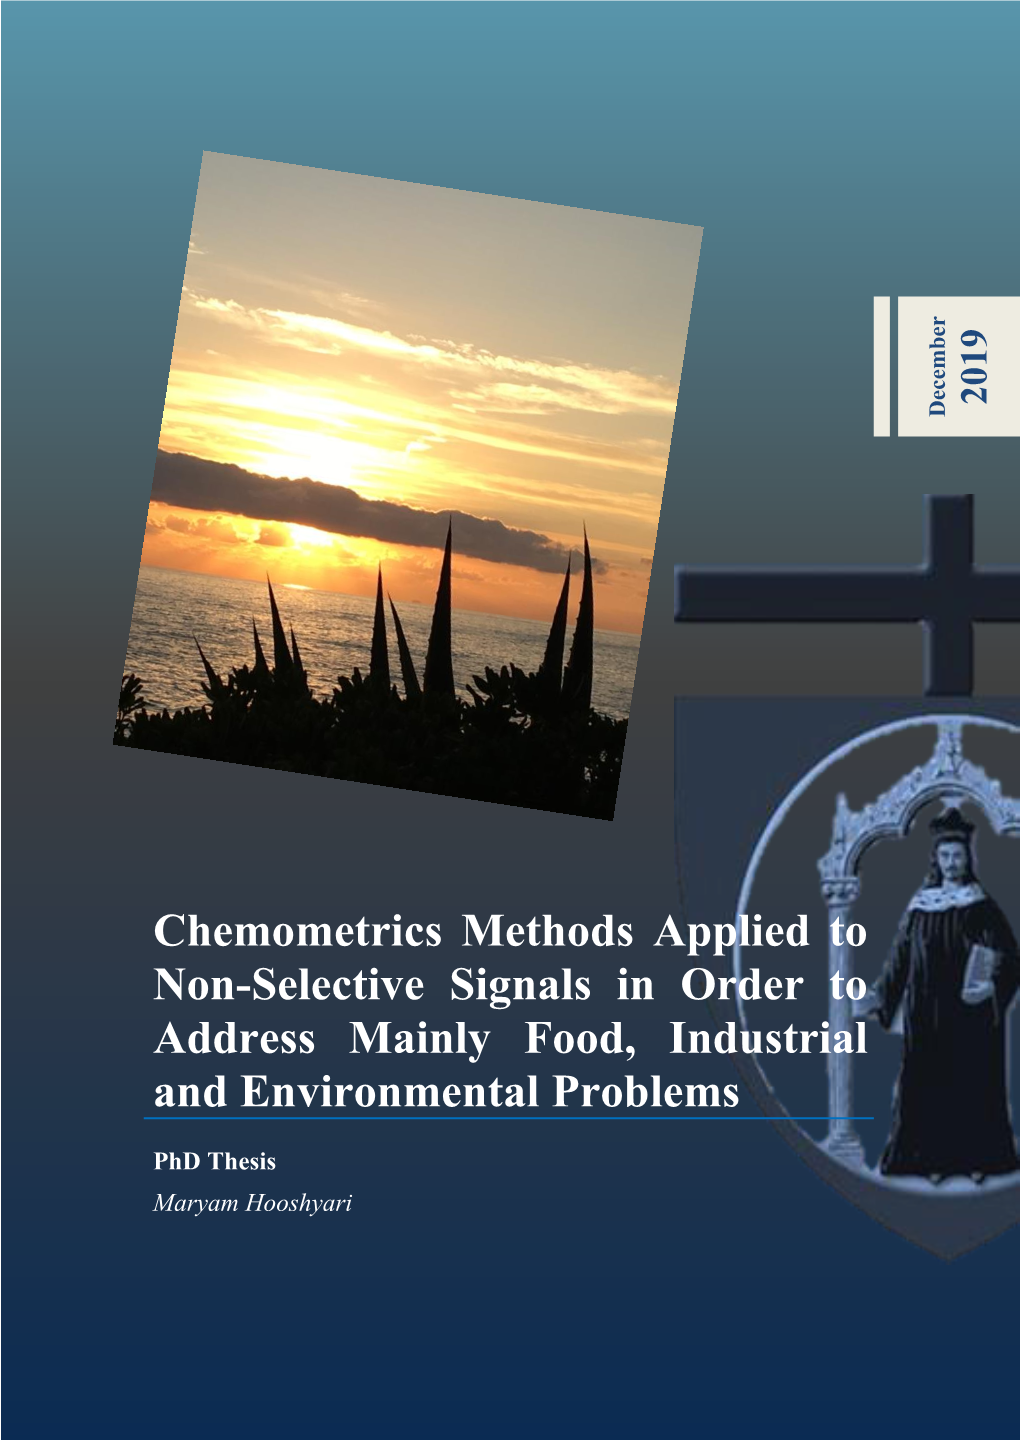 Chemometrics Methods Applied to Non-Selective Signals in Order to Address Mainly Food, Industrial and Environmental Problems